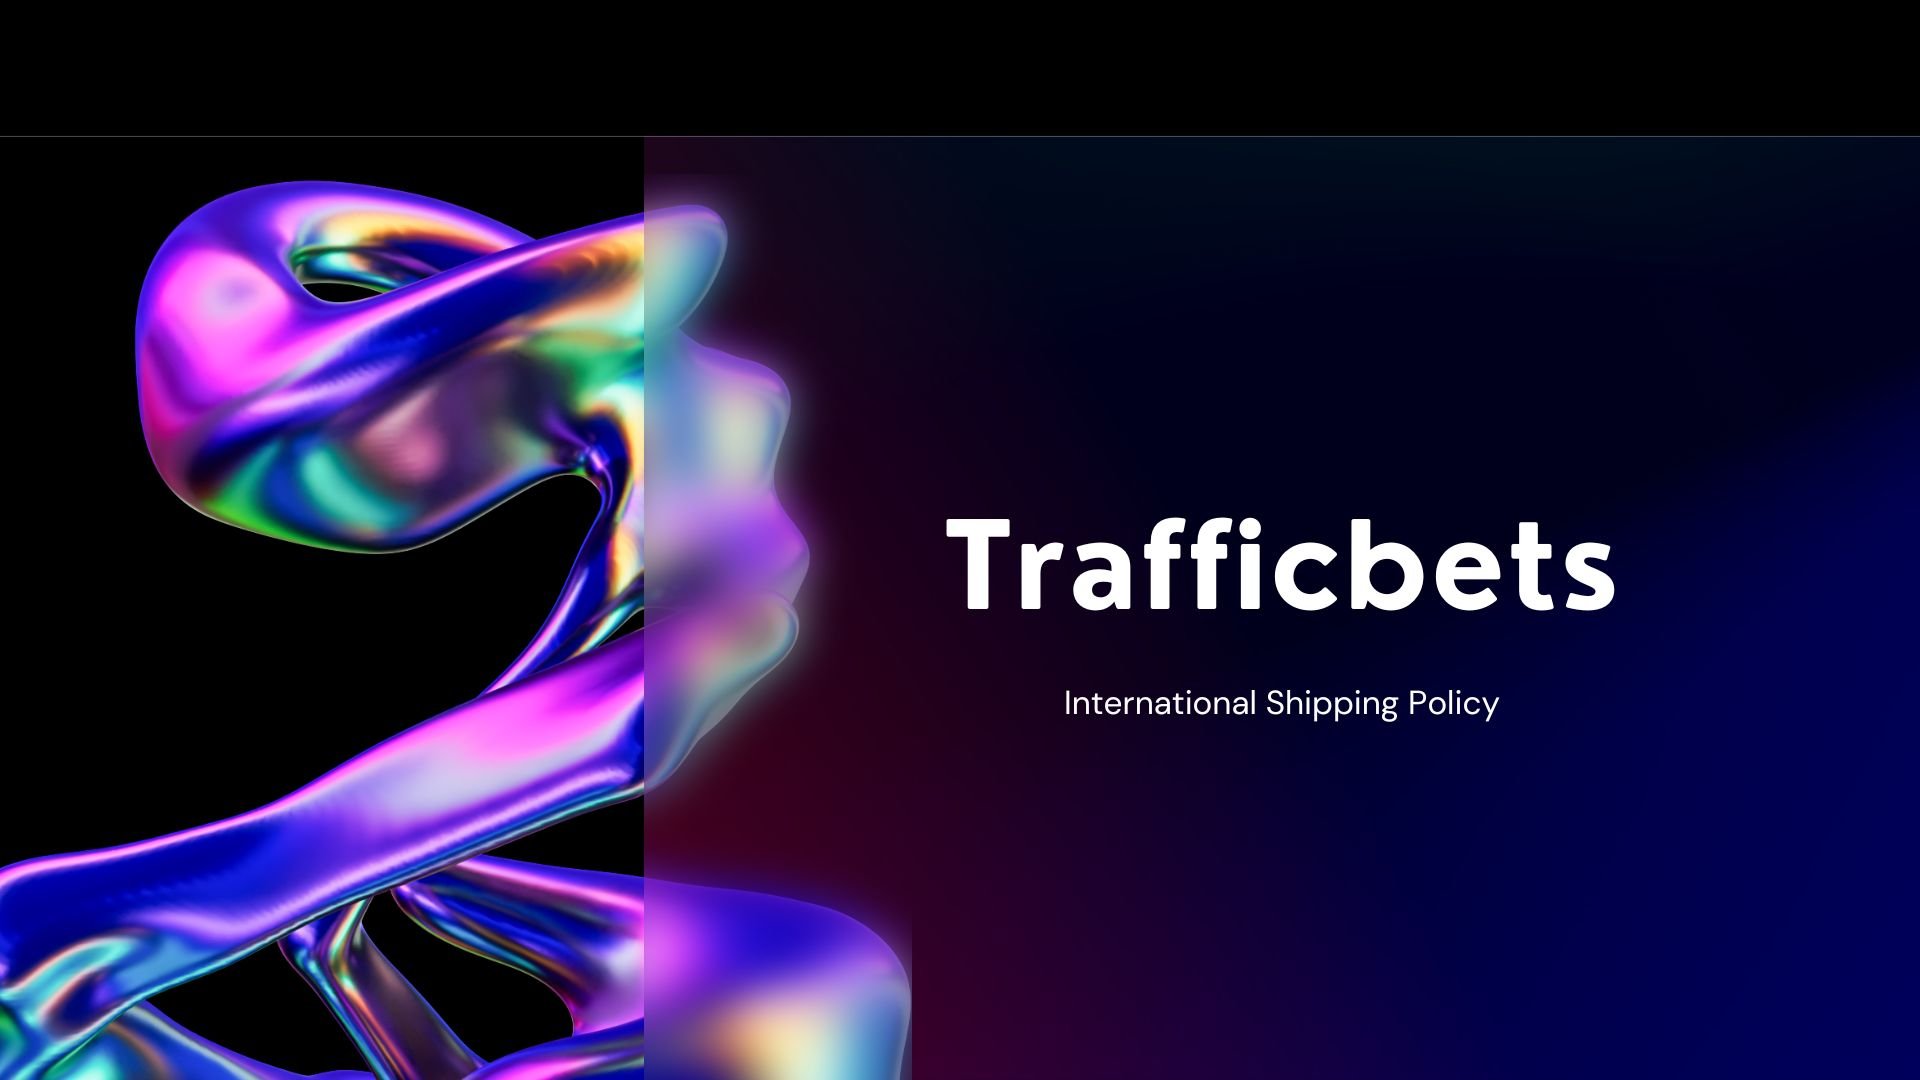 International Shipping Policy